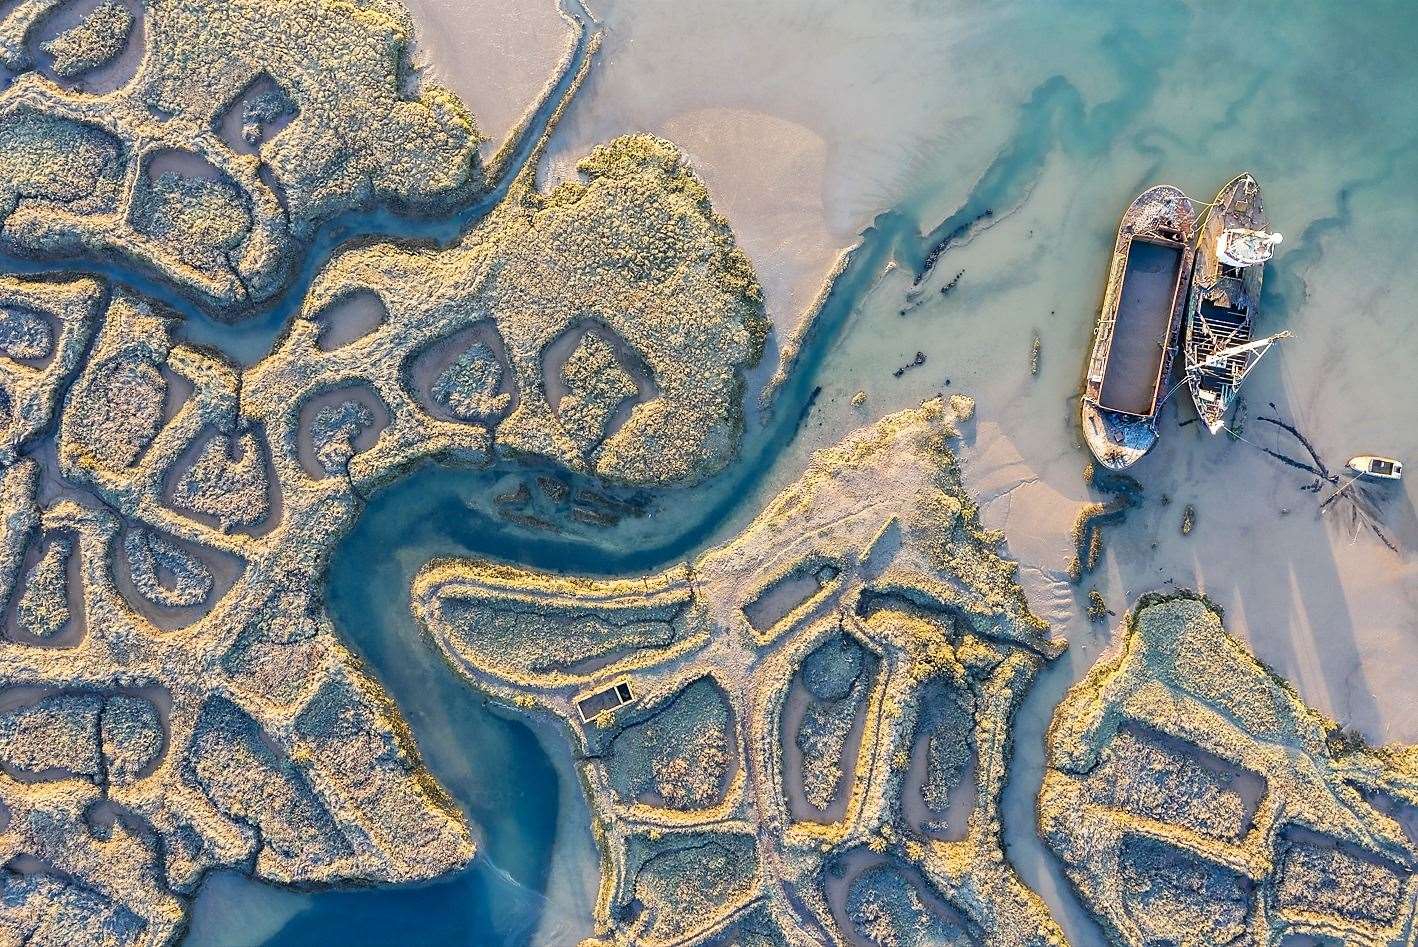 The Old Oyster Beds by Justin Minns - Overall Winner.